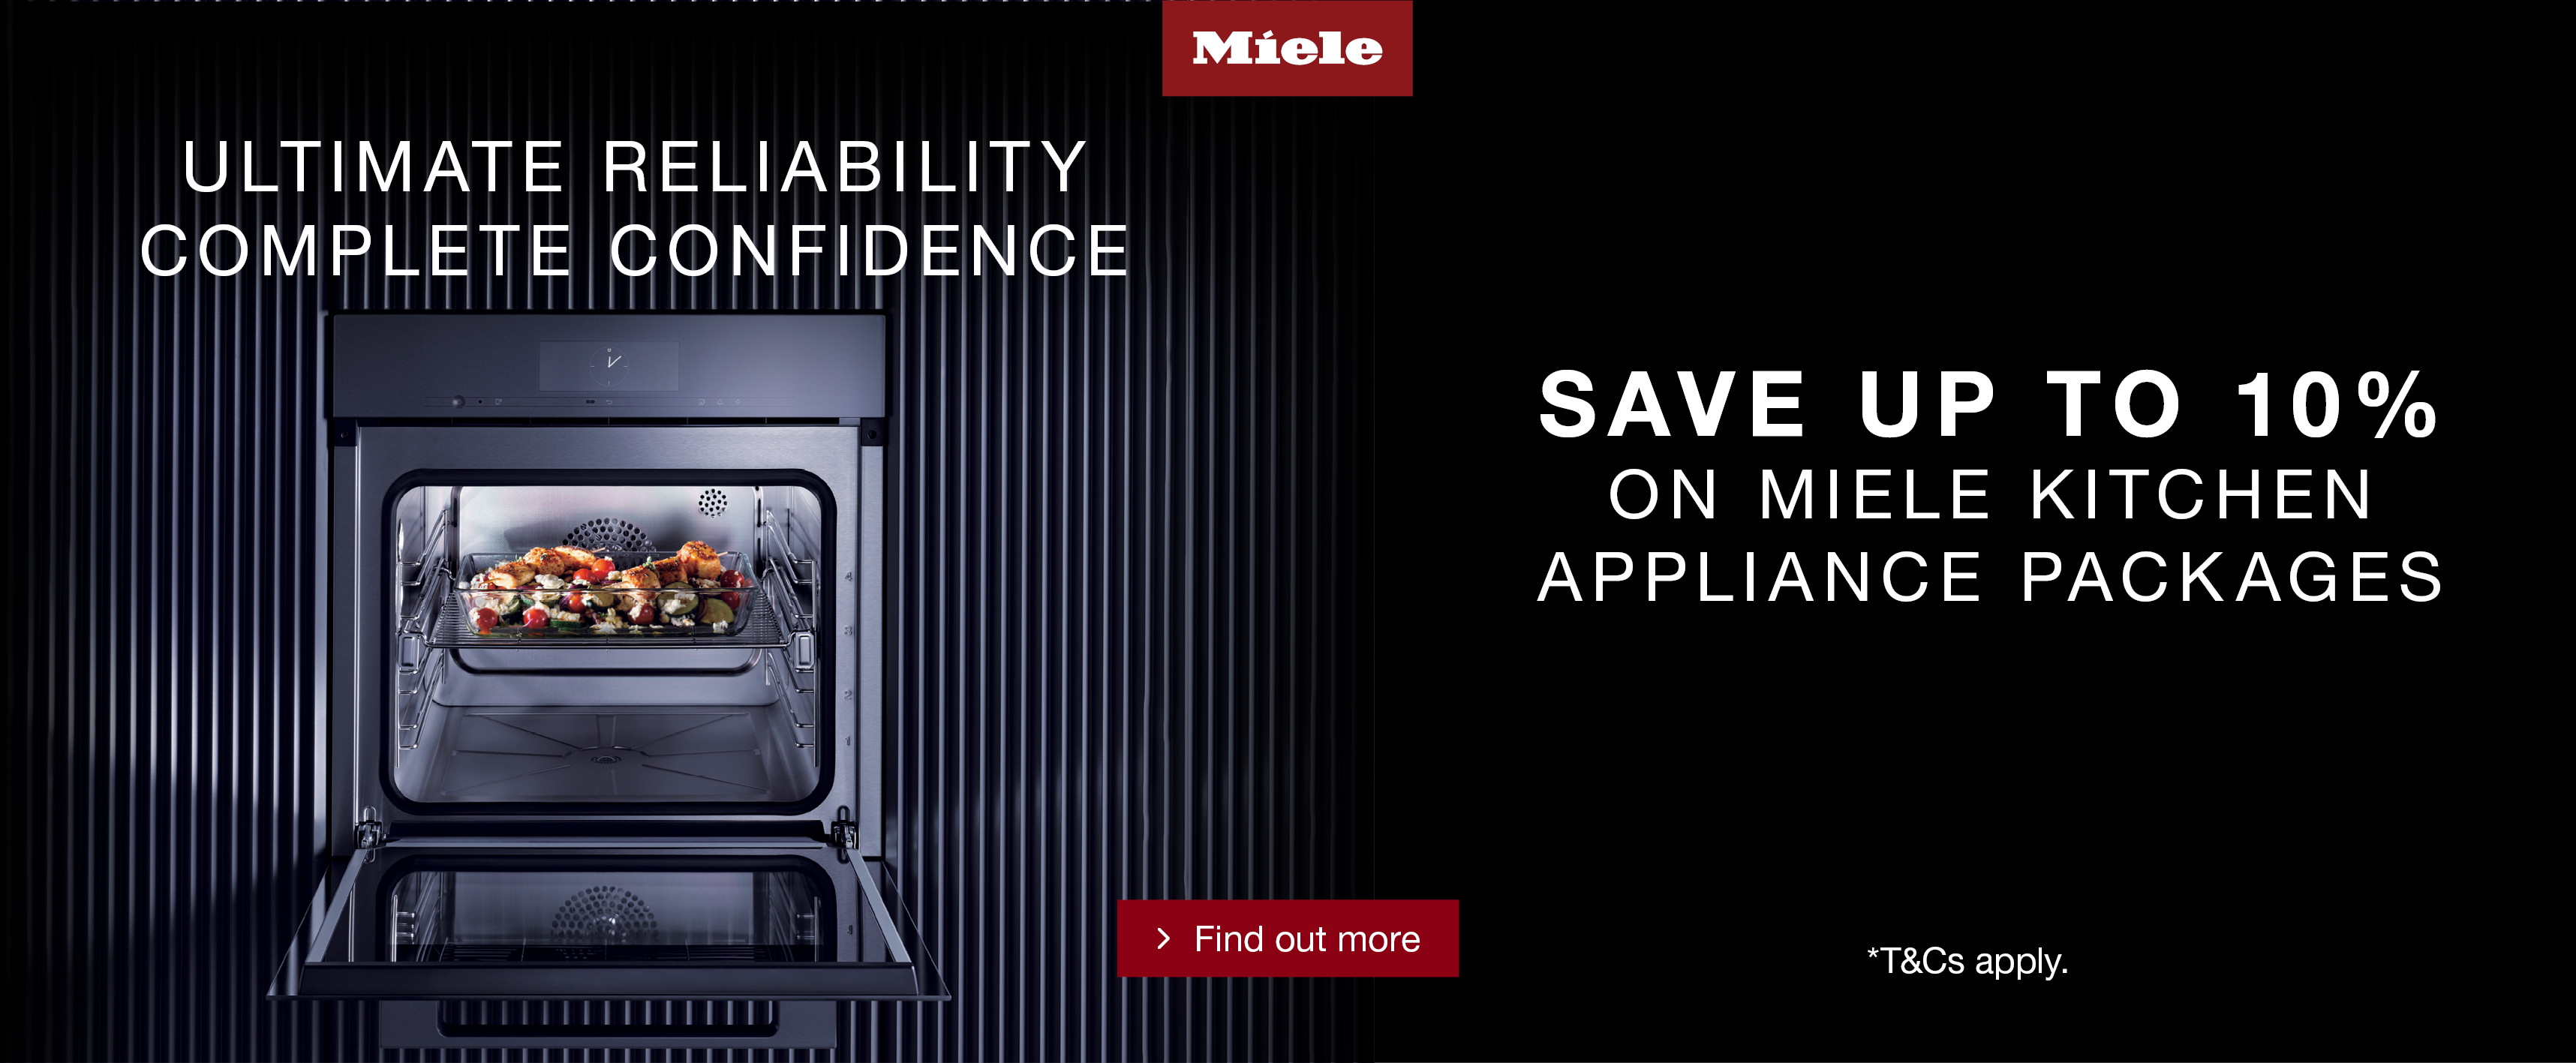 Save up to 10% on Miele Kitchen Appliance Packages at Elite Appliances